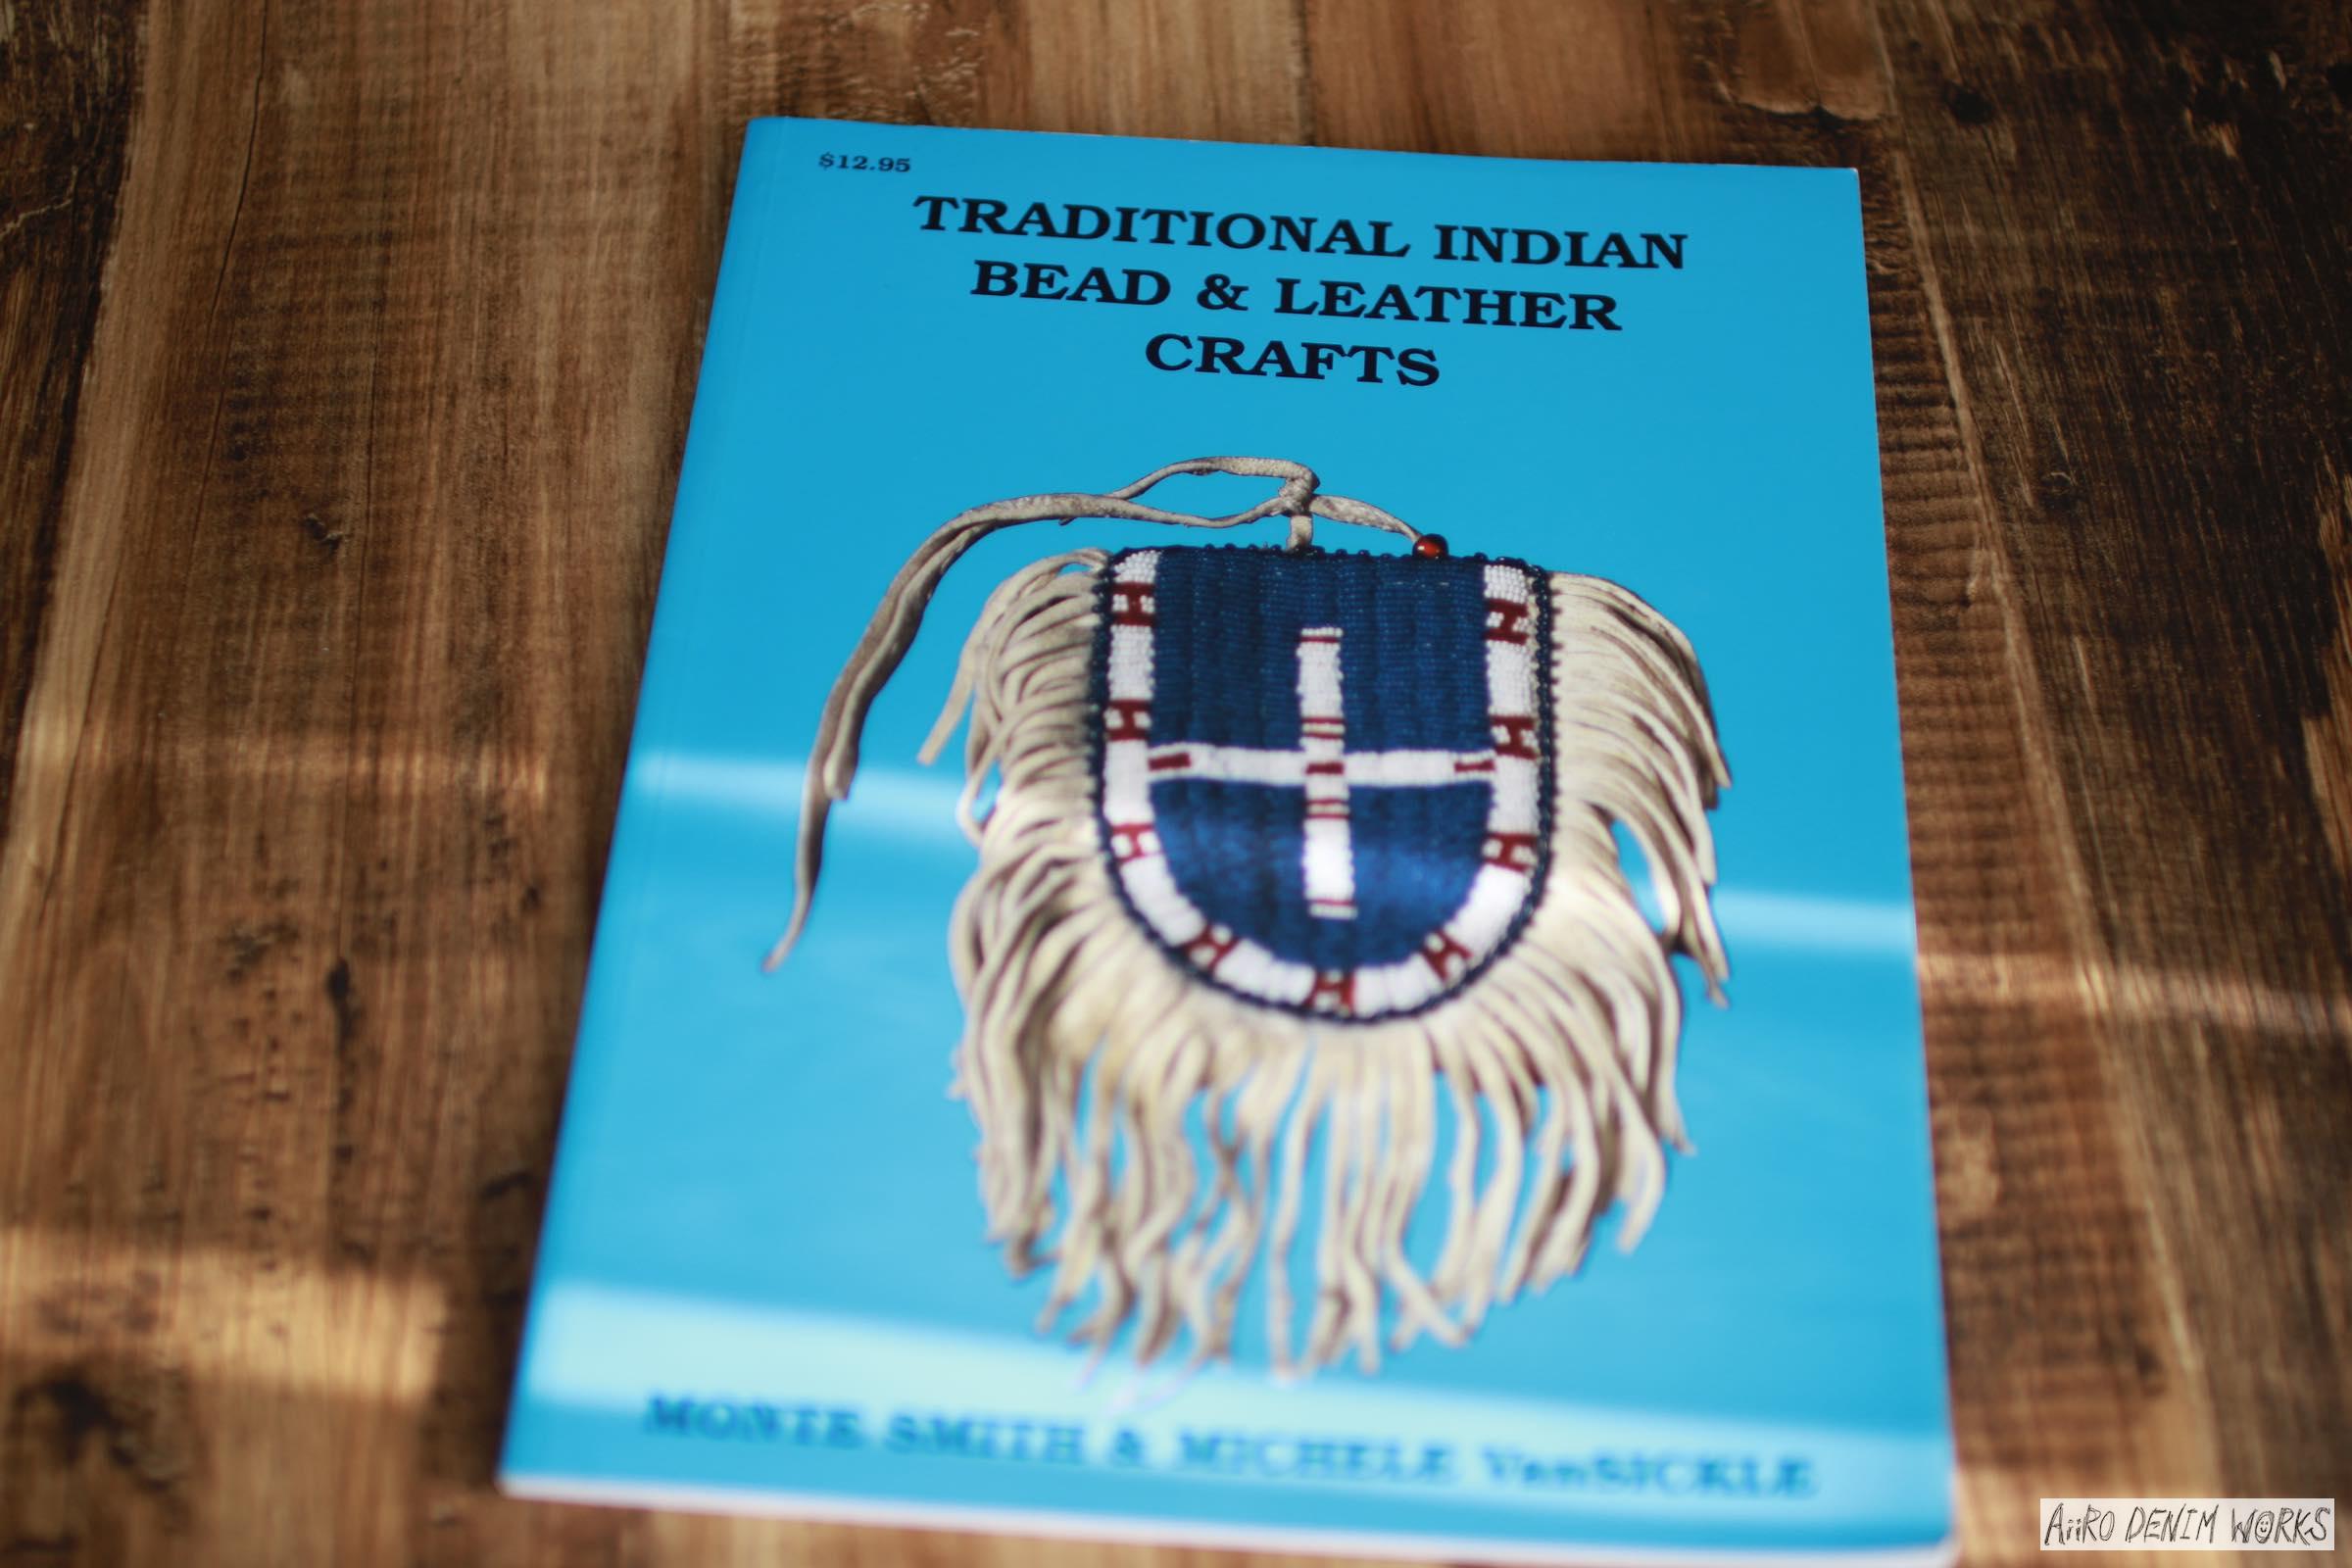 TRADITIONAL INDIAN BEAD & LEATHER CRAFTS